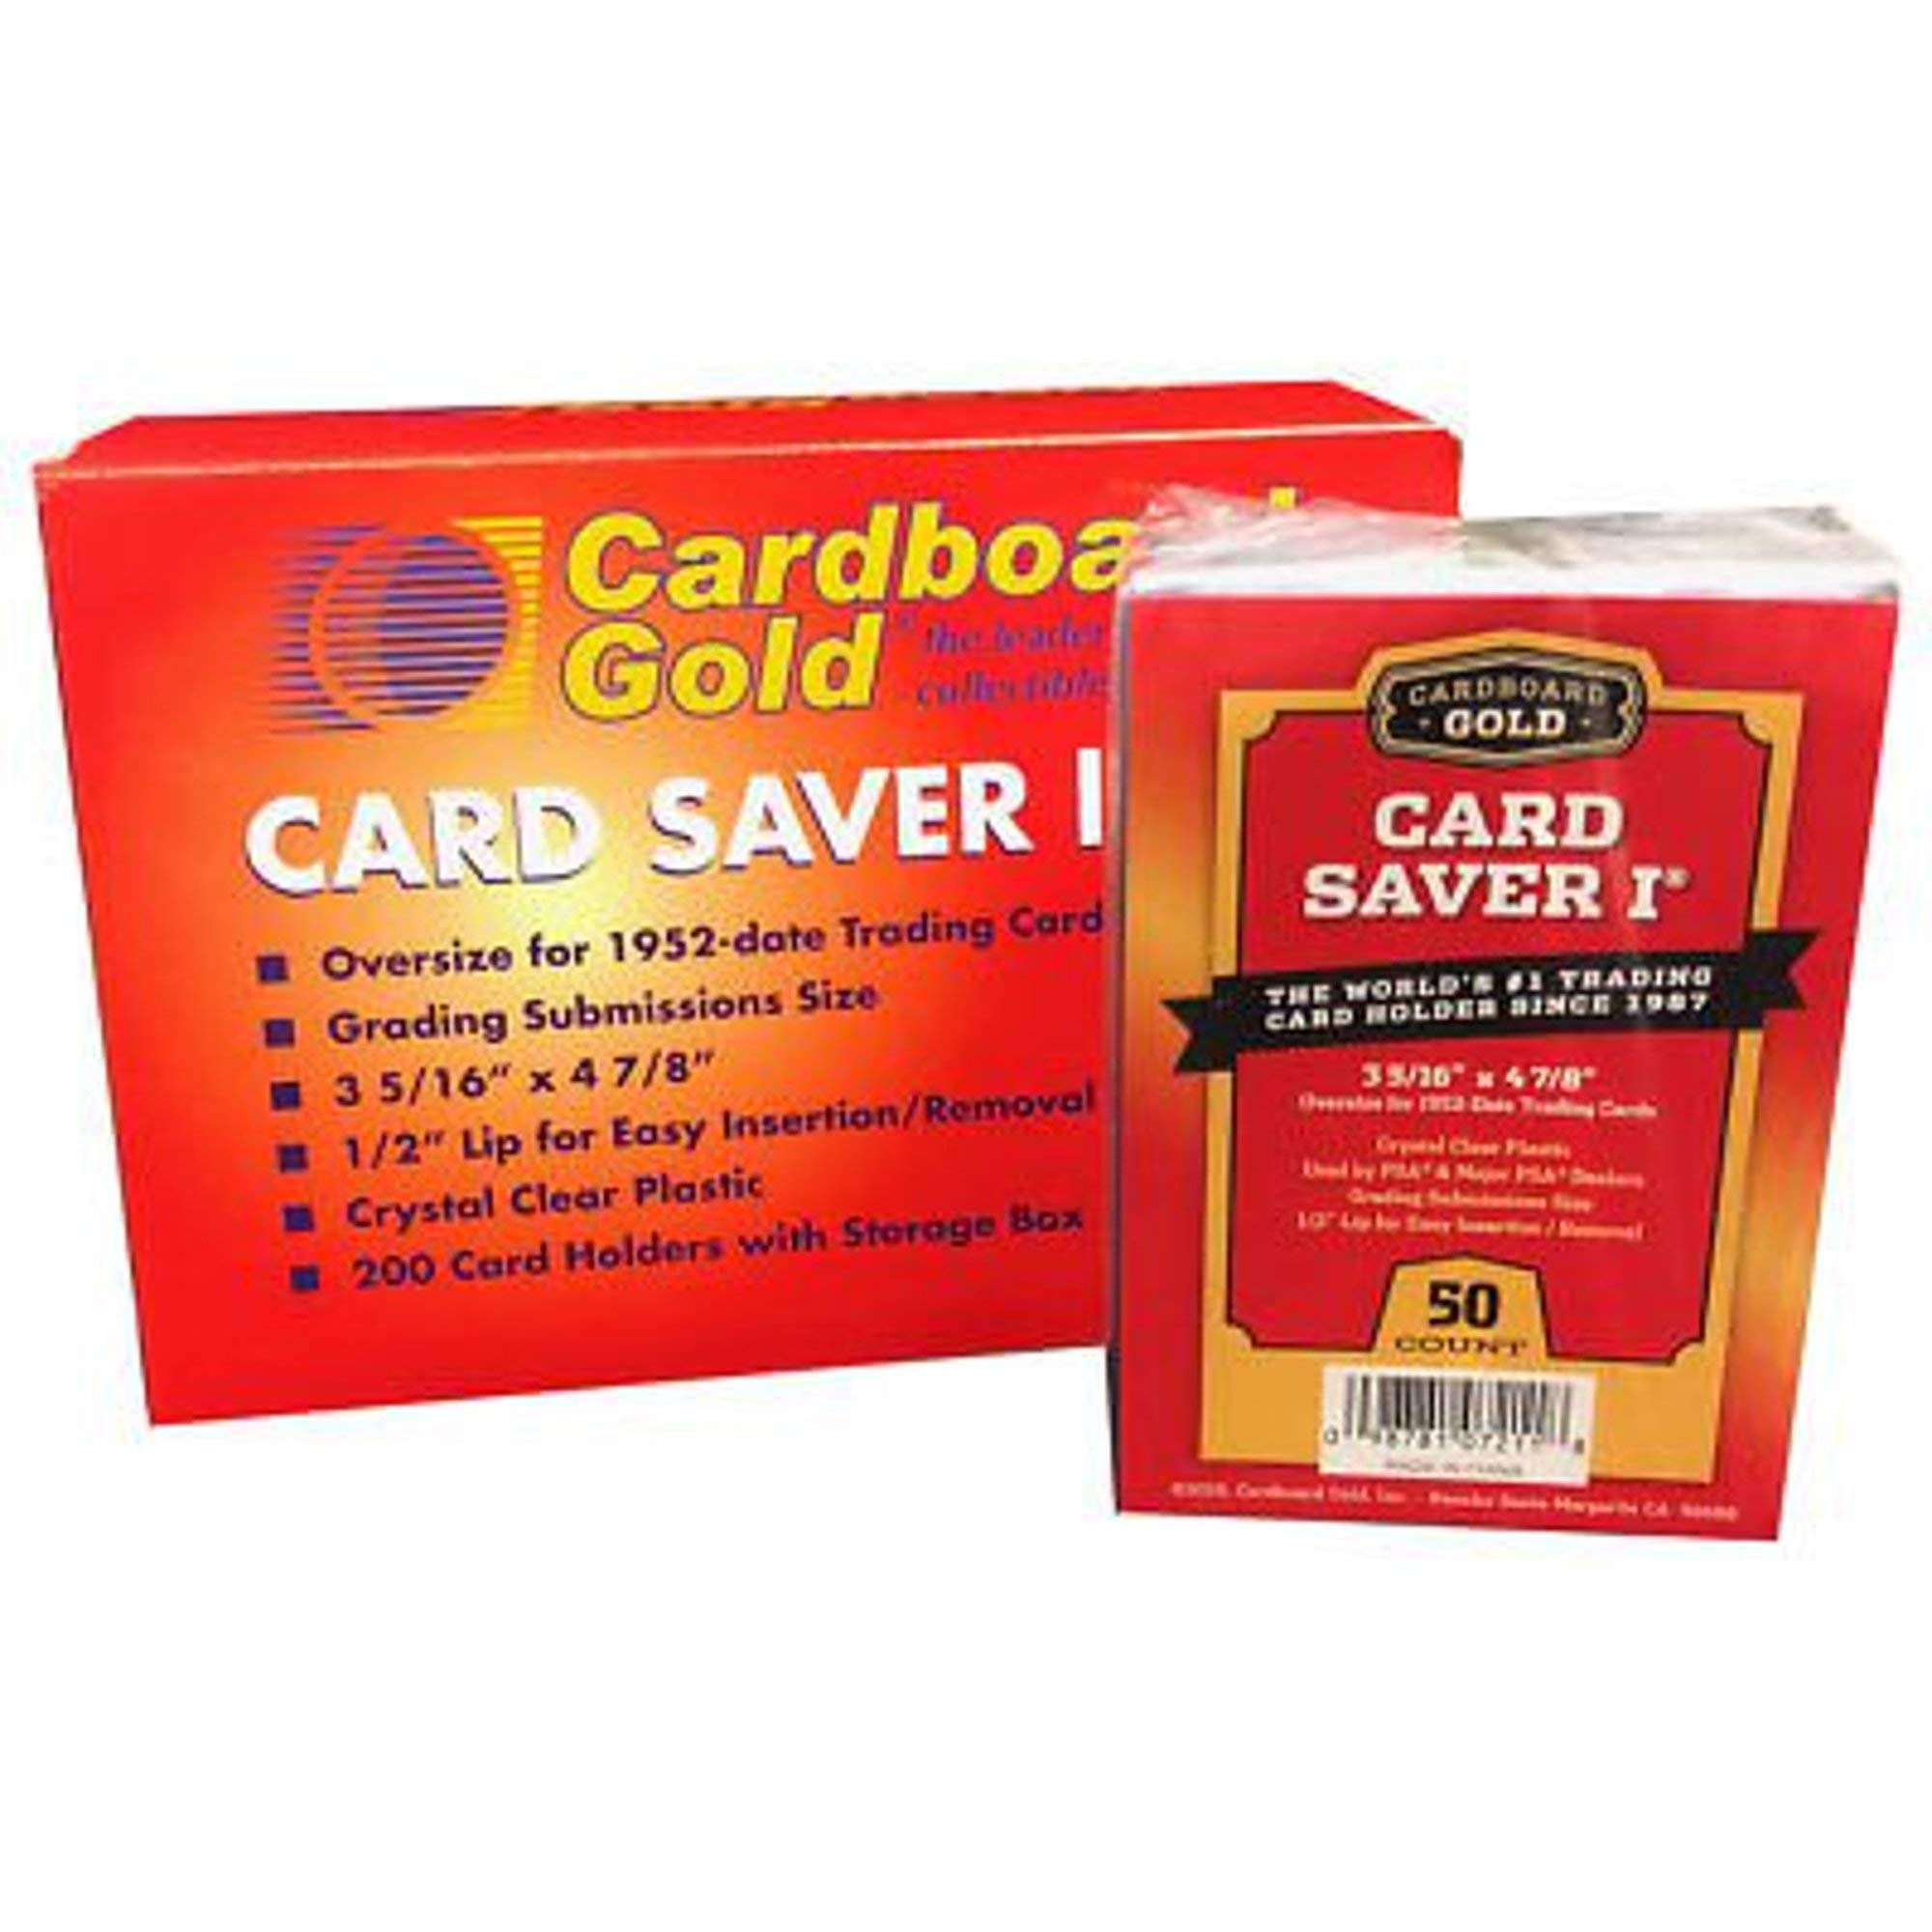 Cardboard Gold Card Saver 1 200ct Semi-rigid Card Holders -PSA Submission Size